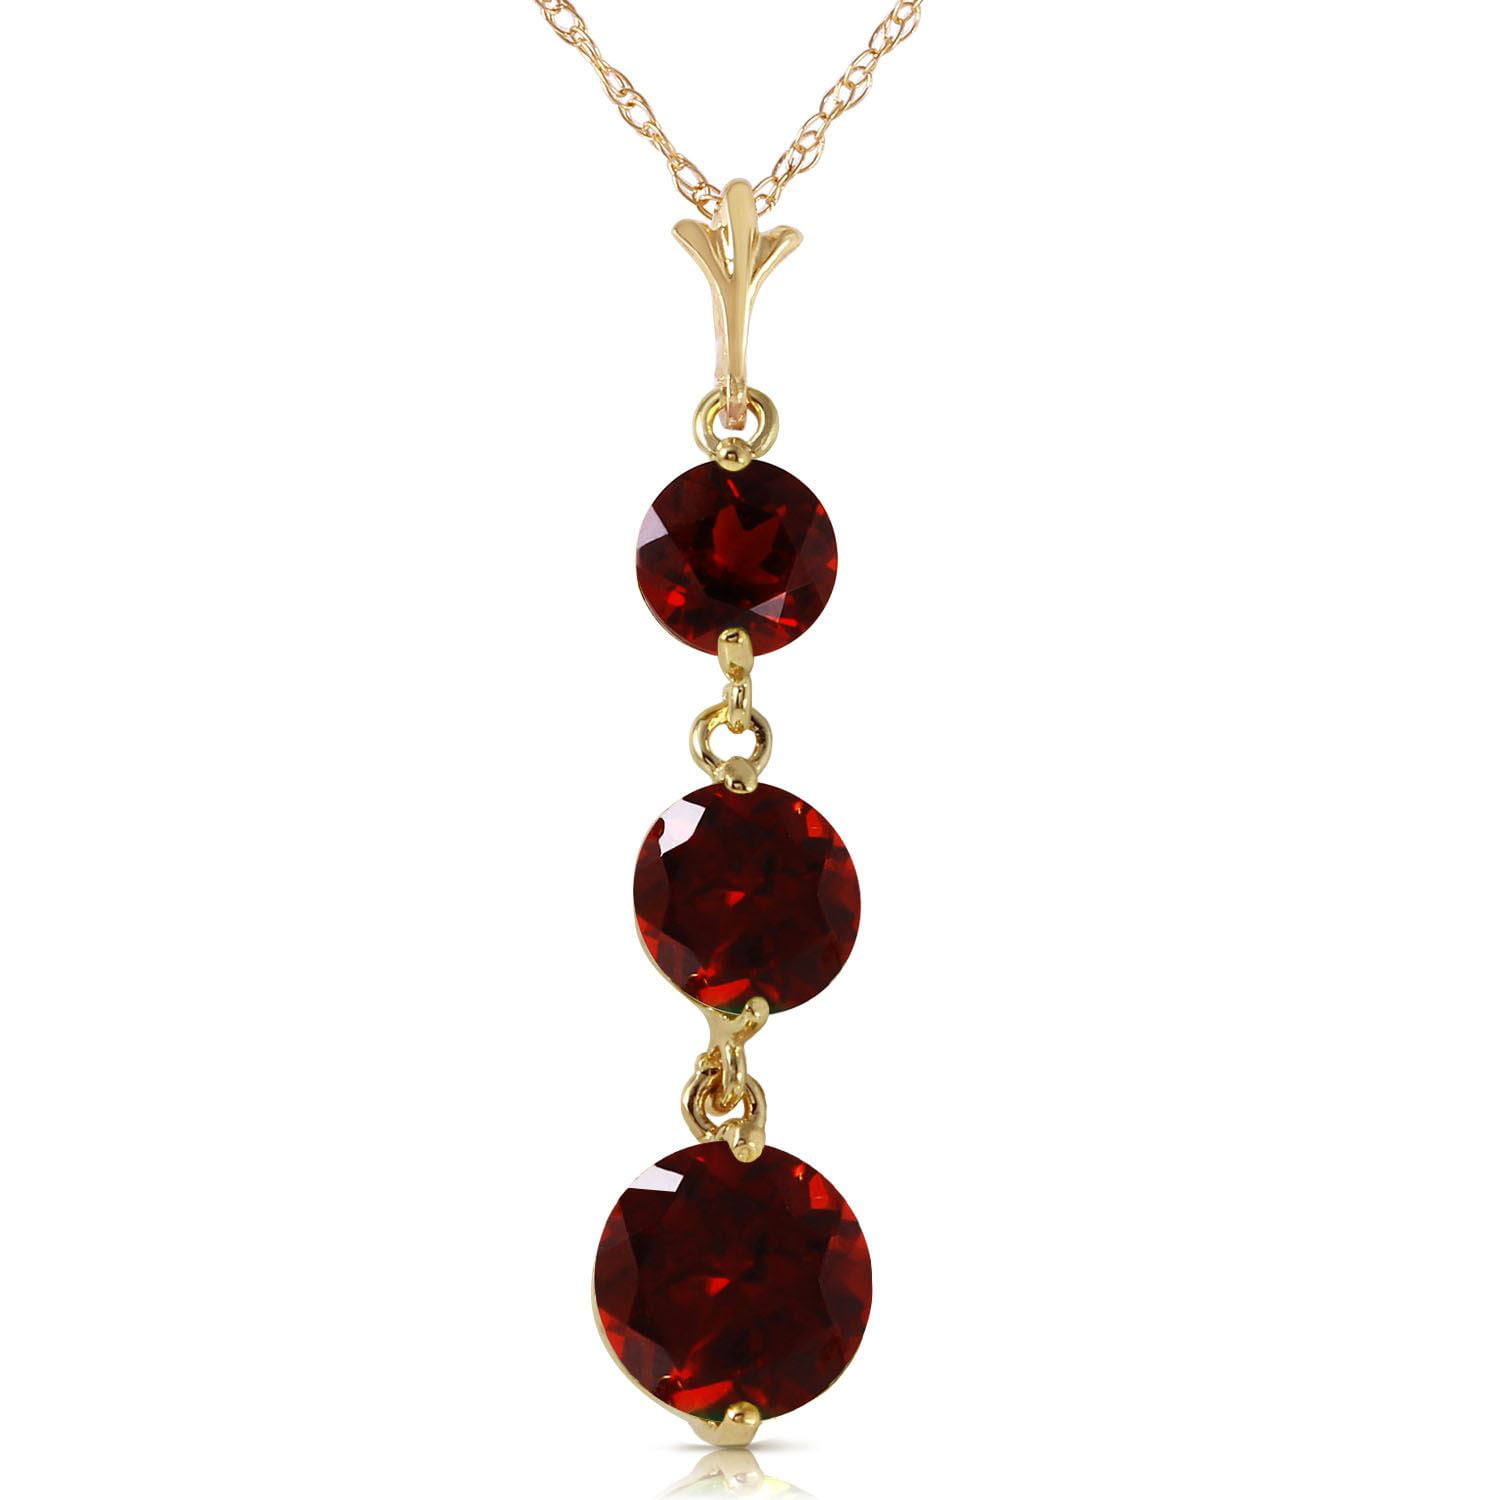 ALARRI 14K Solid White Gold Heart Necklace w/ Dangling Natural Garnet with 22 Inch Chain Length 